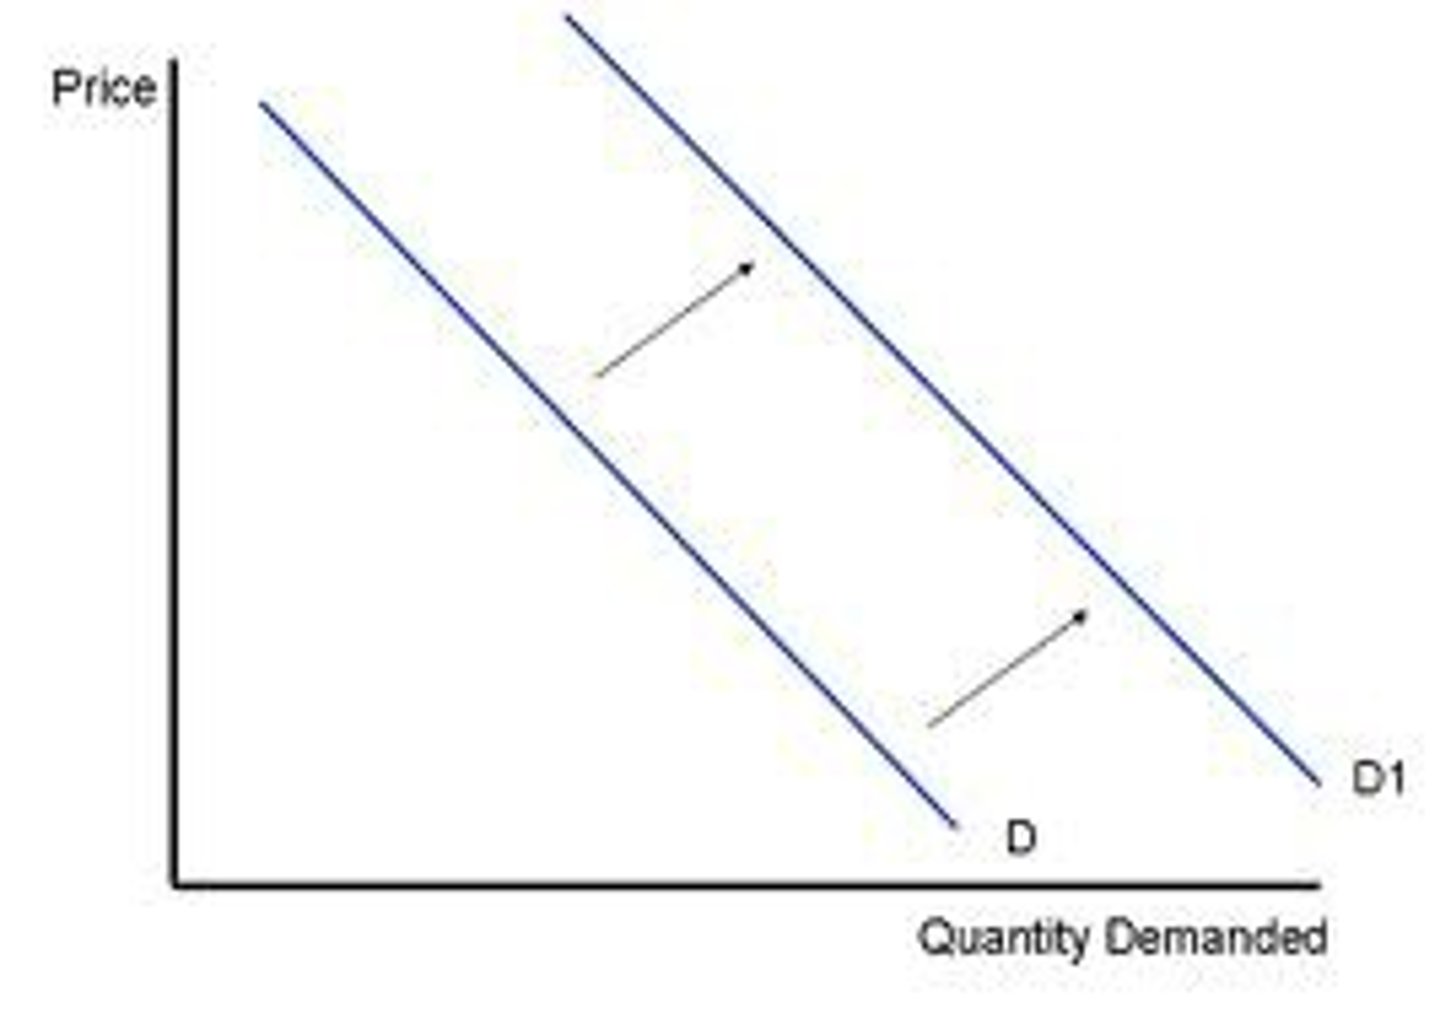 <p>rightwards shift of the entire demand curve for a product, caused by favourable changes in non-price factors that affect demand.</p>